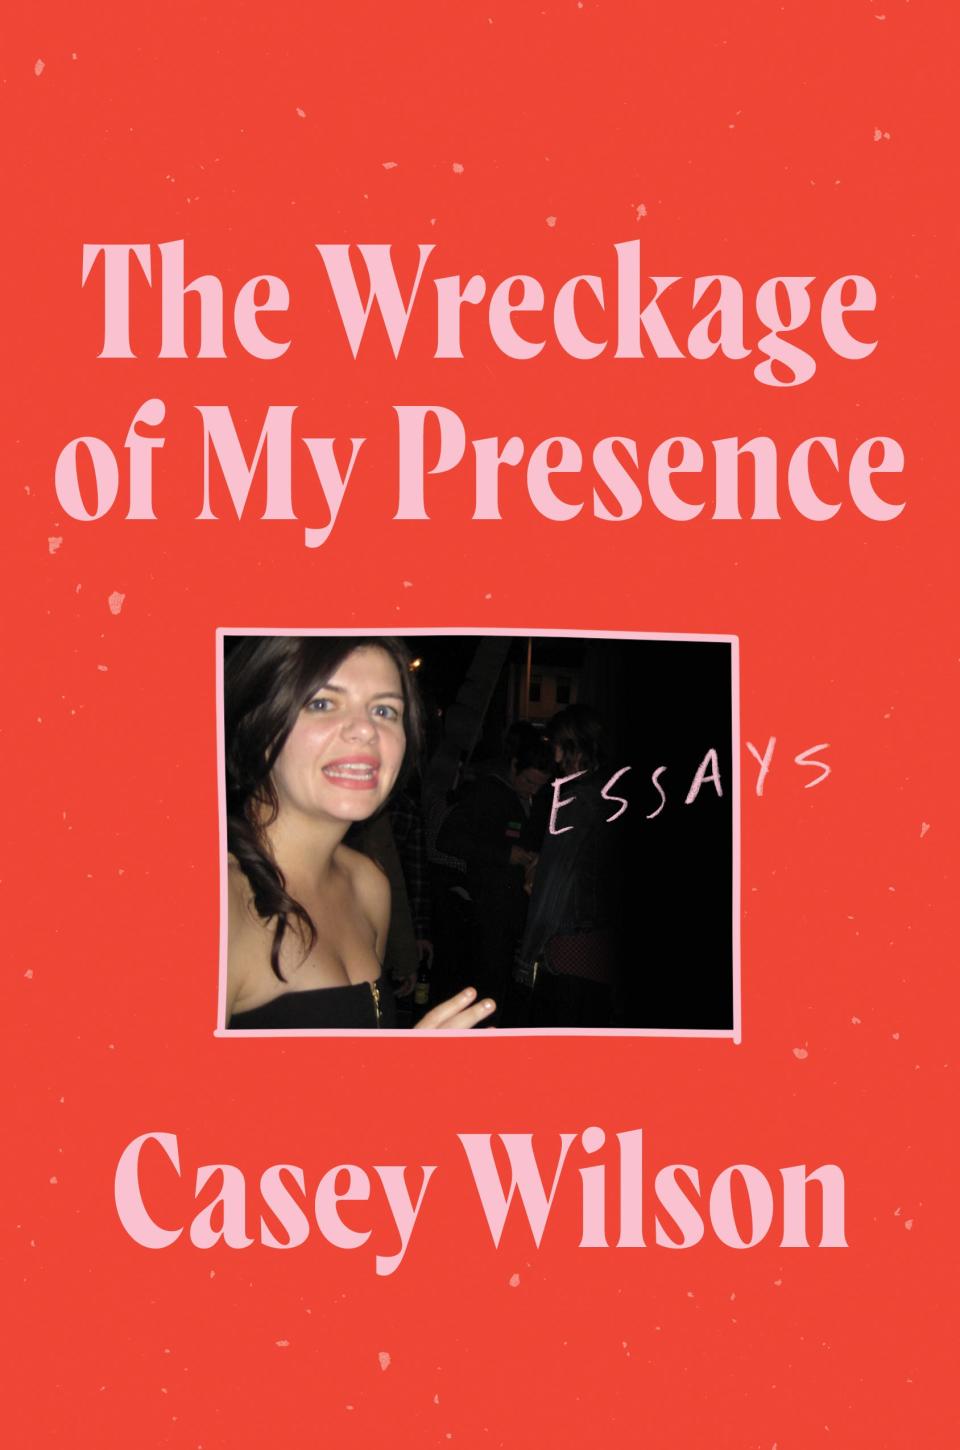 The cover of Wilson's book, available now.